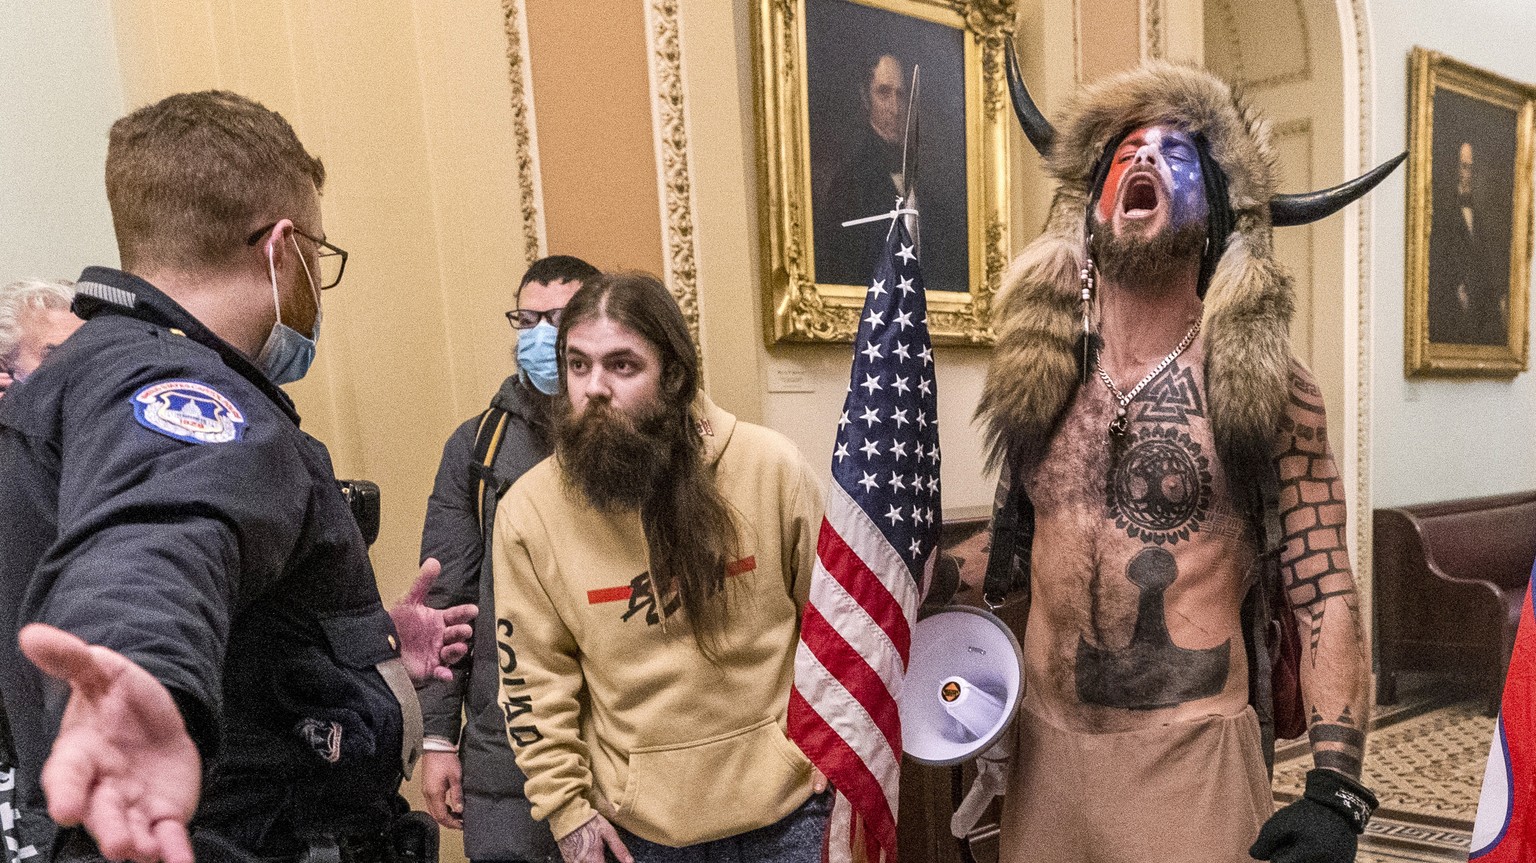 FILE - In this Wednesday, Jan. 6, 2021 file photo, supporters of President Donald Trump, including Jacob Chansley, right with fur hat, are confronted by U.S. Capitol Police officers outside the Senate ...